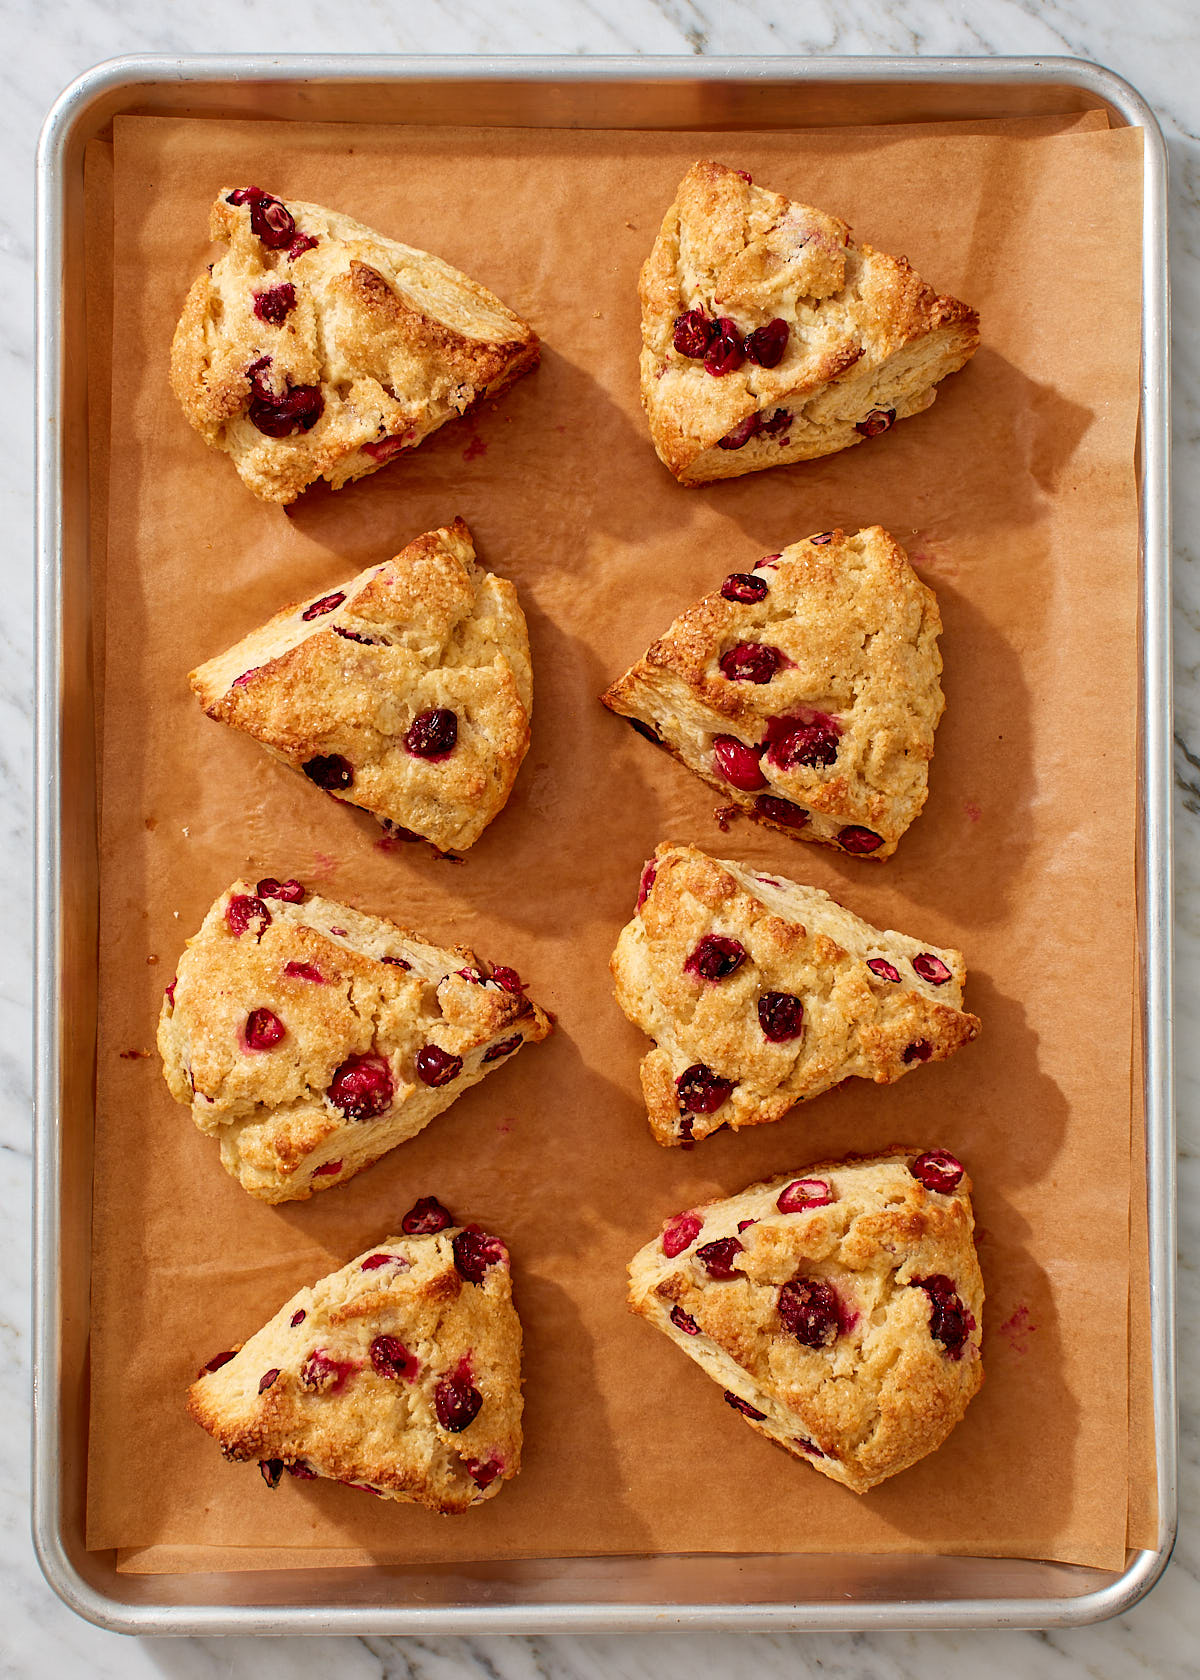 Cranberry scones, fresh from the oven, on a baking sheet.